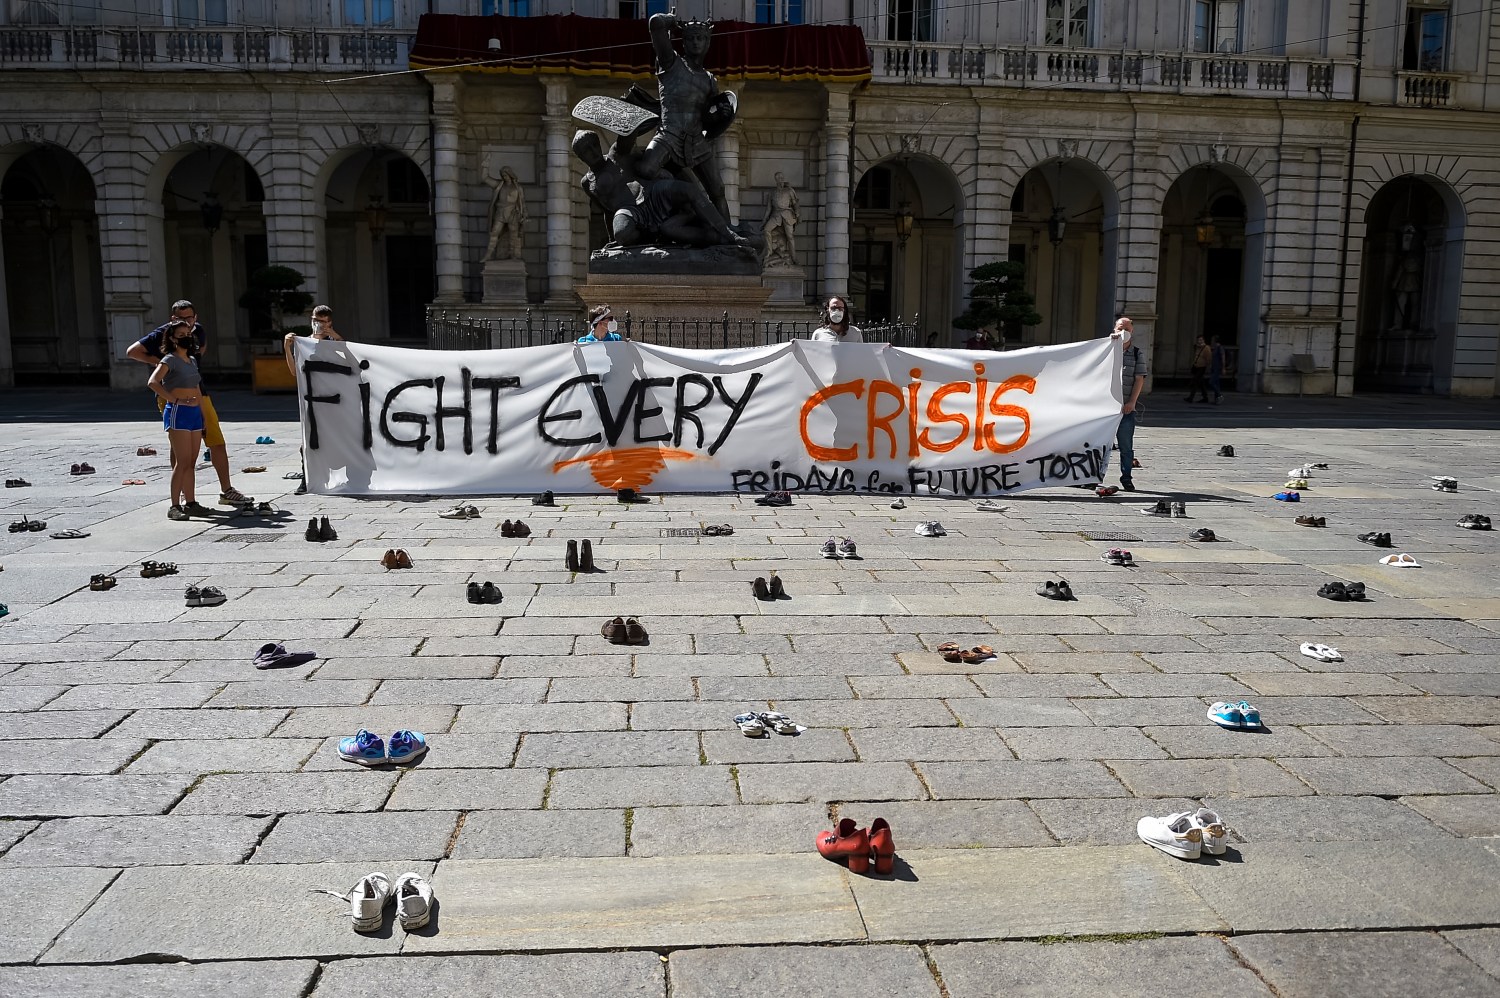 TURIN, ITALY - June 05, 2020: Protesters hold a banner reading 'Fight every crisis' during a Fridays for future demonstration, a worldwide climate strike against governmental inaction towards climate breakdown and environmental pollution. (Photo by Nicolò Campo/Sipa USA)No Use UK. No Use Germany.